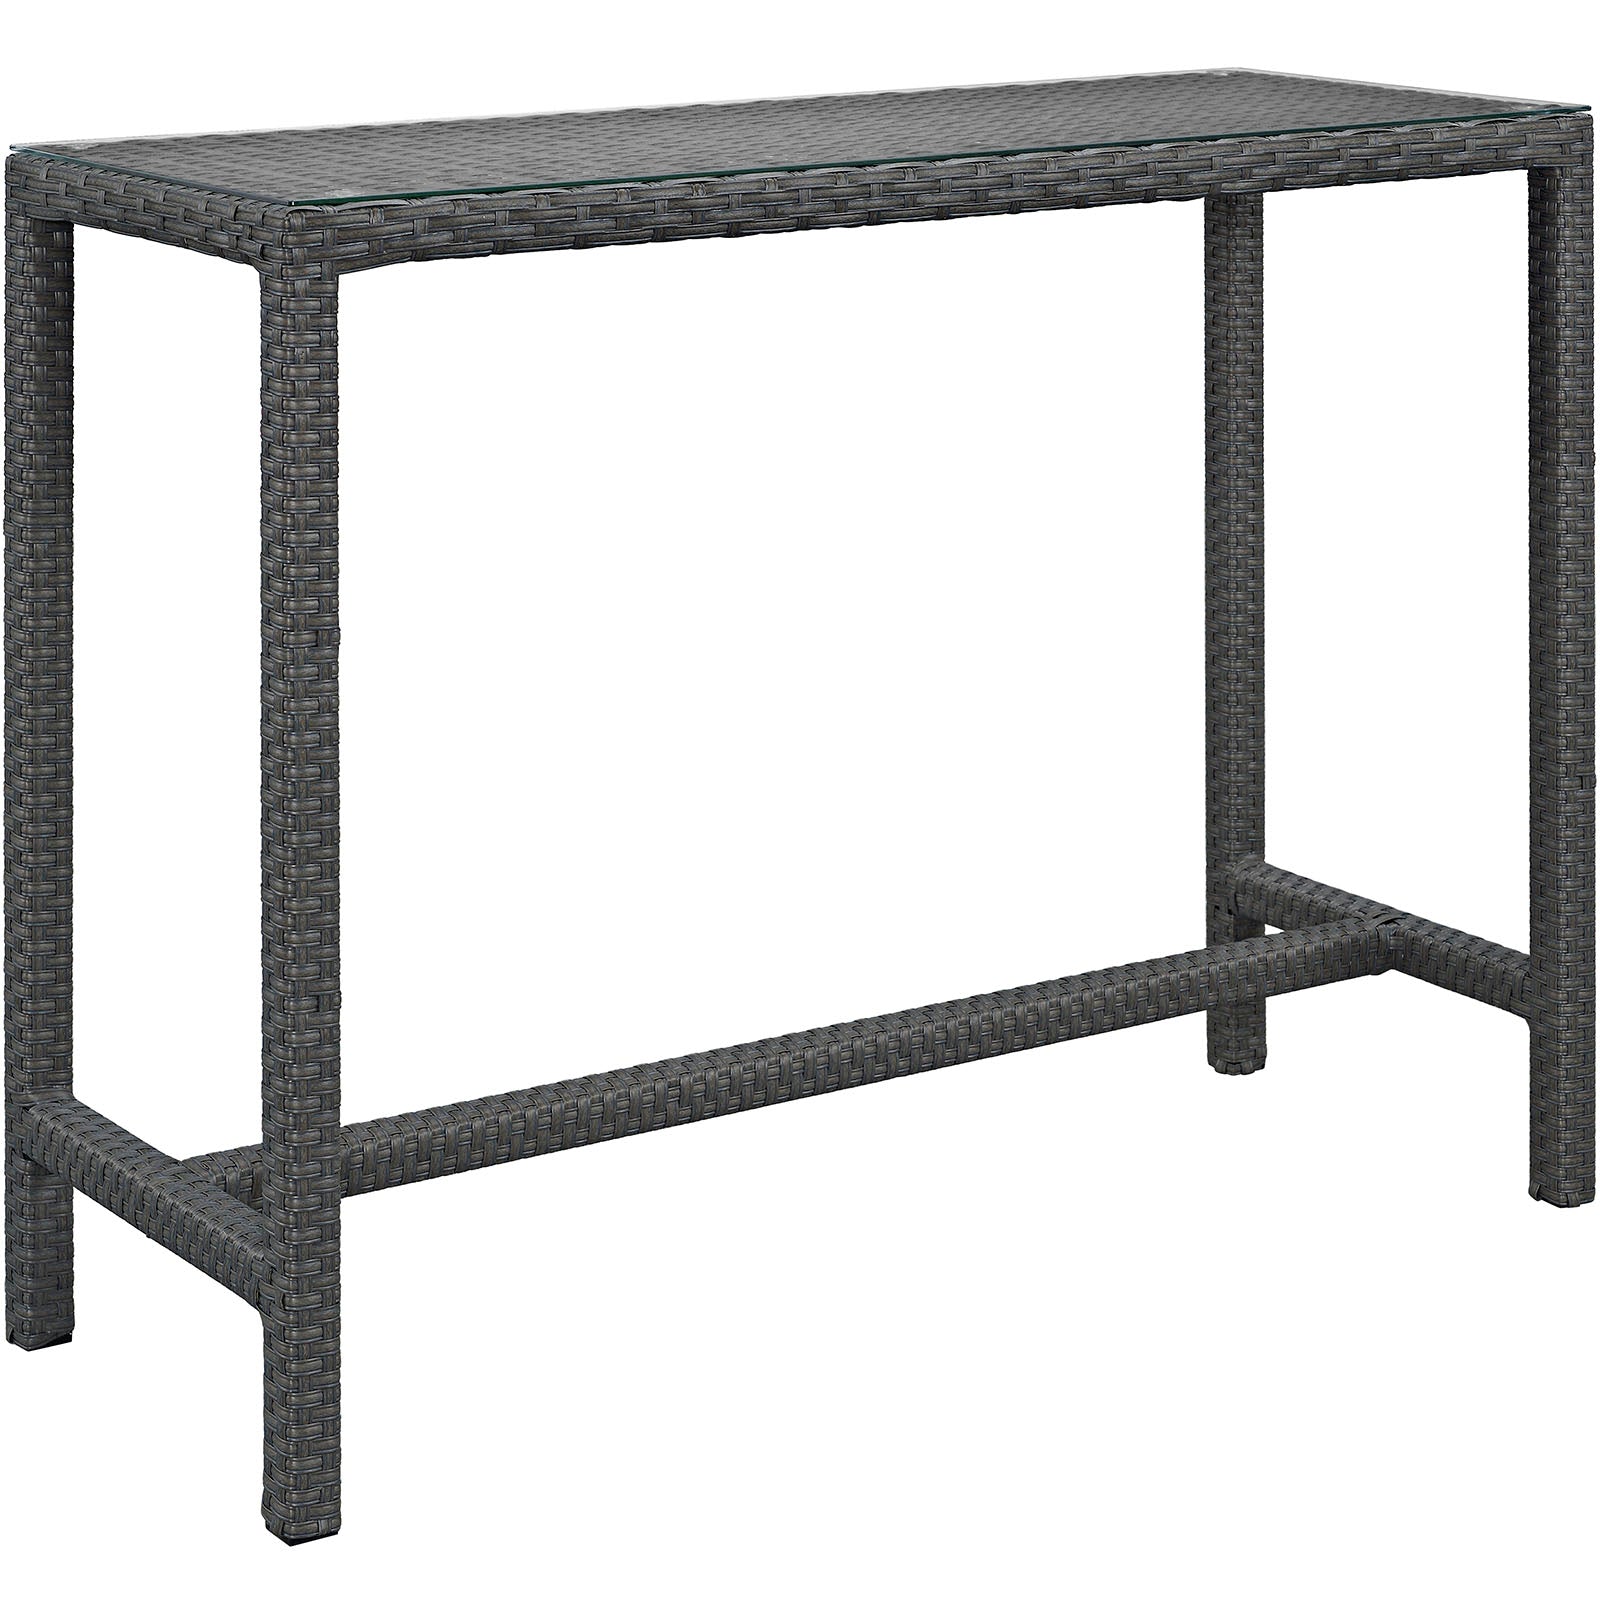 Sojourn Large Outdoor Patio Bar Table - East Shore Modern Home Furnishings